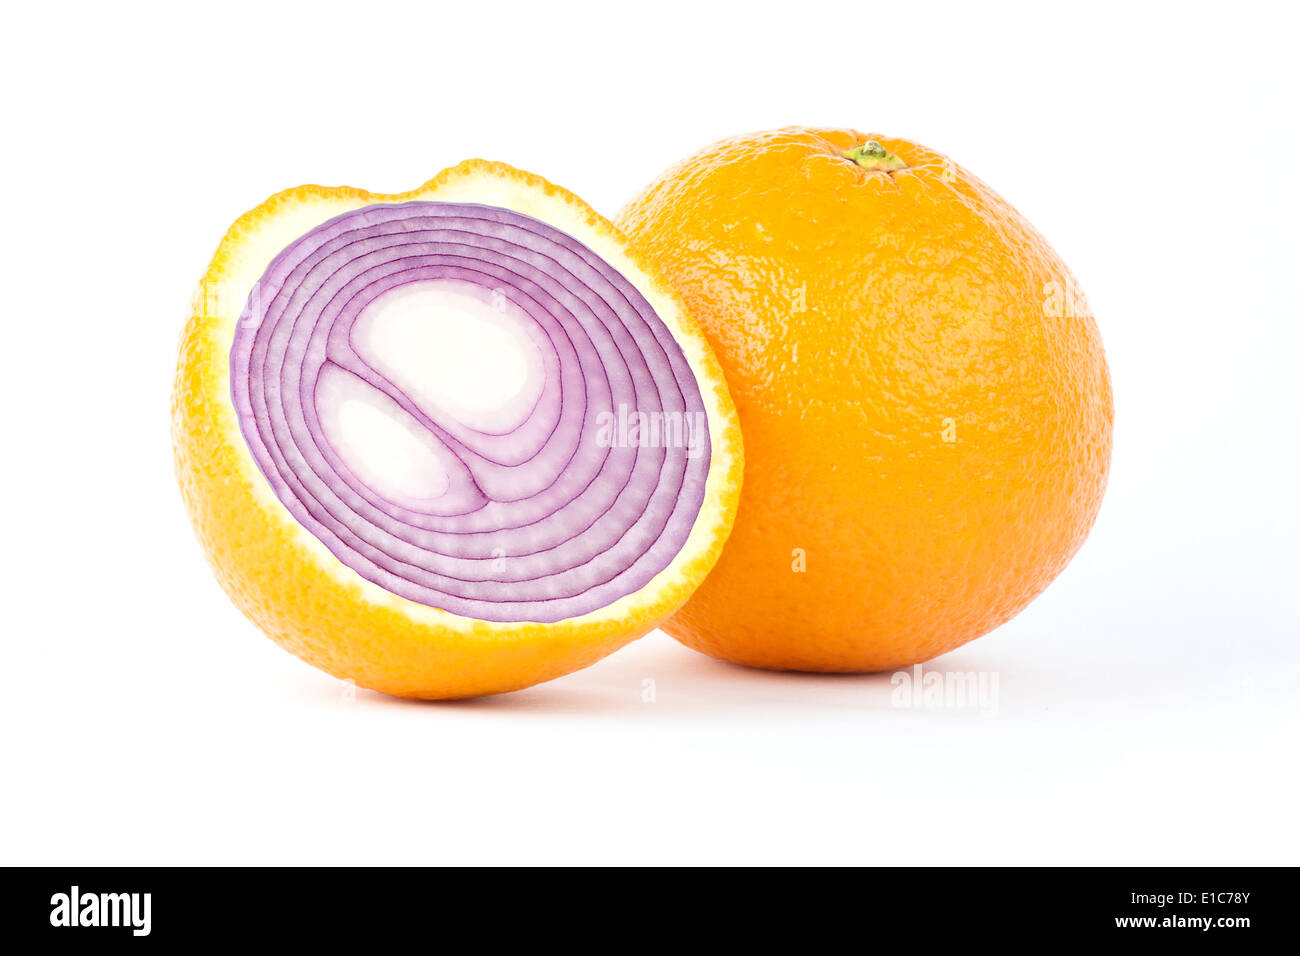 Manipulated image of sliced orange with red onion inside Stock Photo